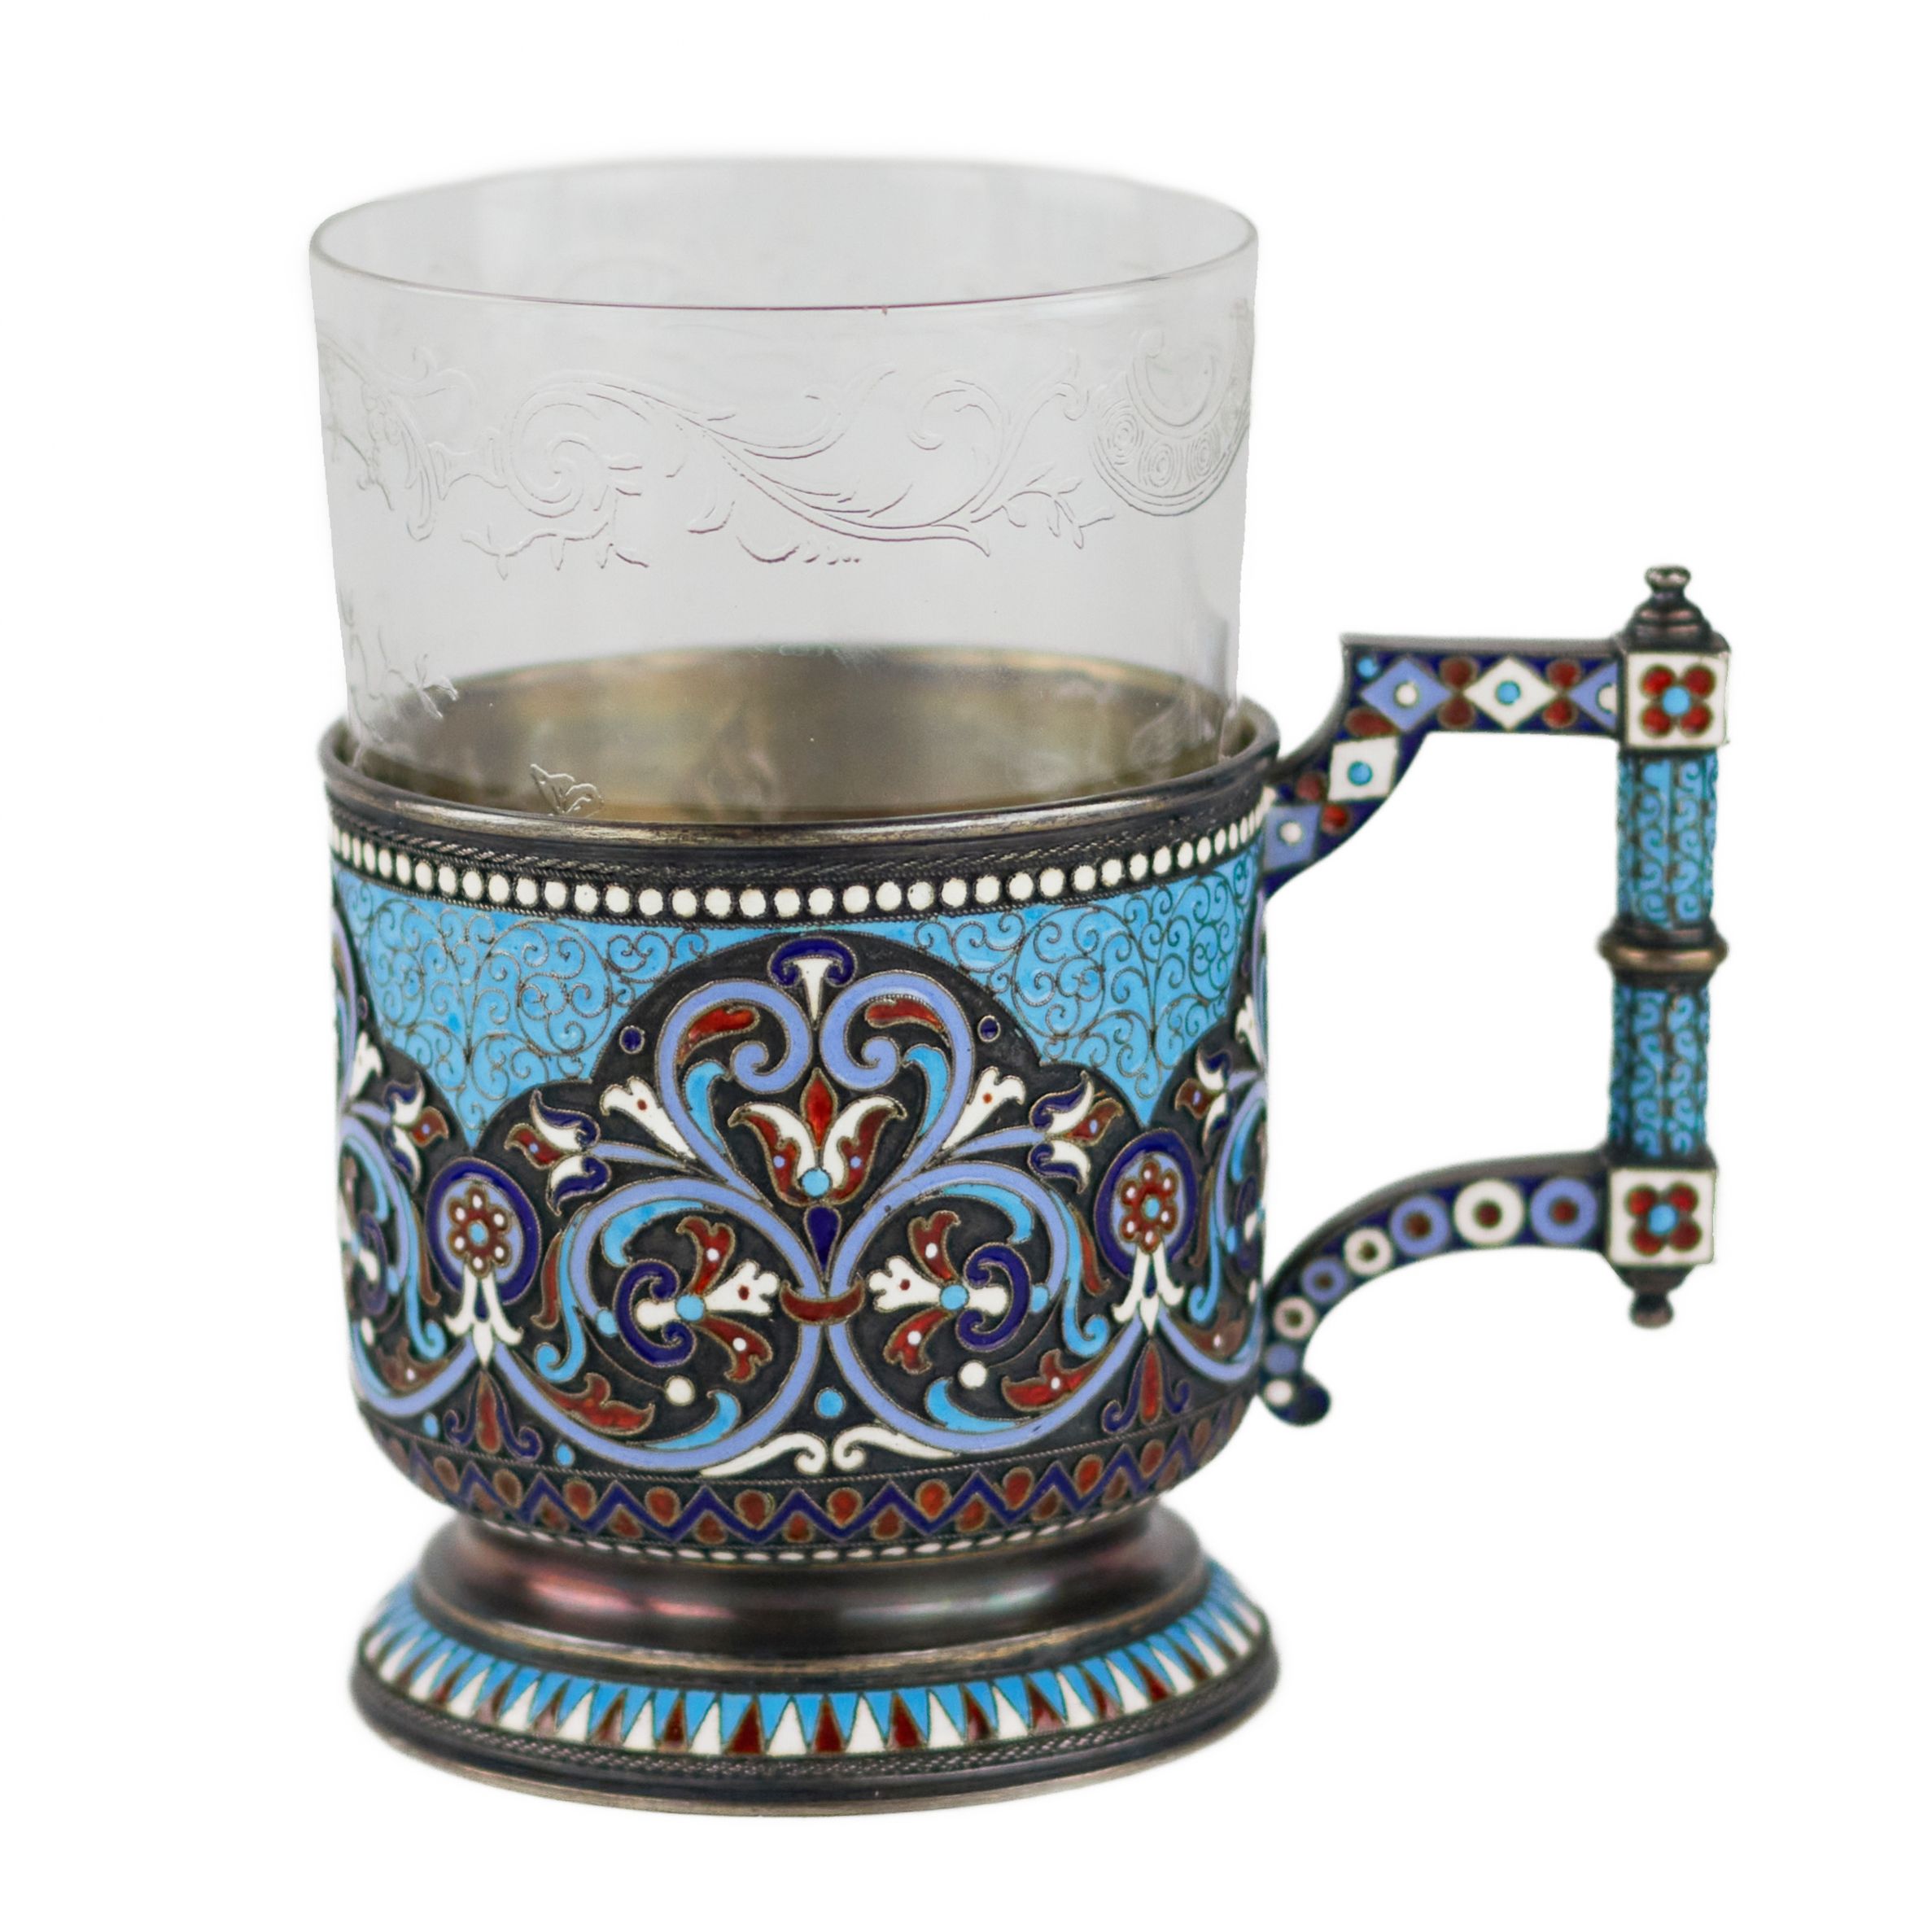 Nikolay ALEXEEV, silver cloisonne enamel glass holder in neo-Russian style. 1895 - Image 2 of 9